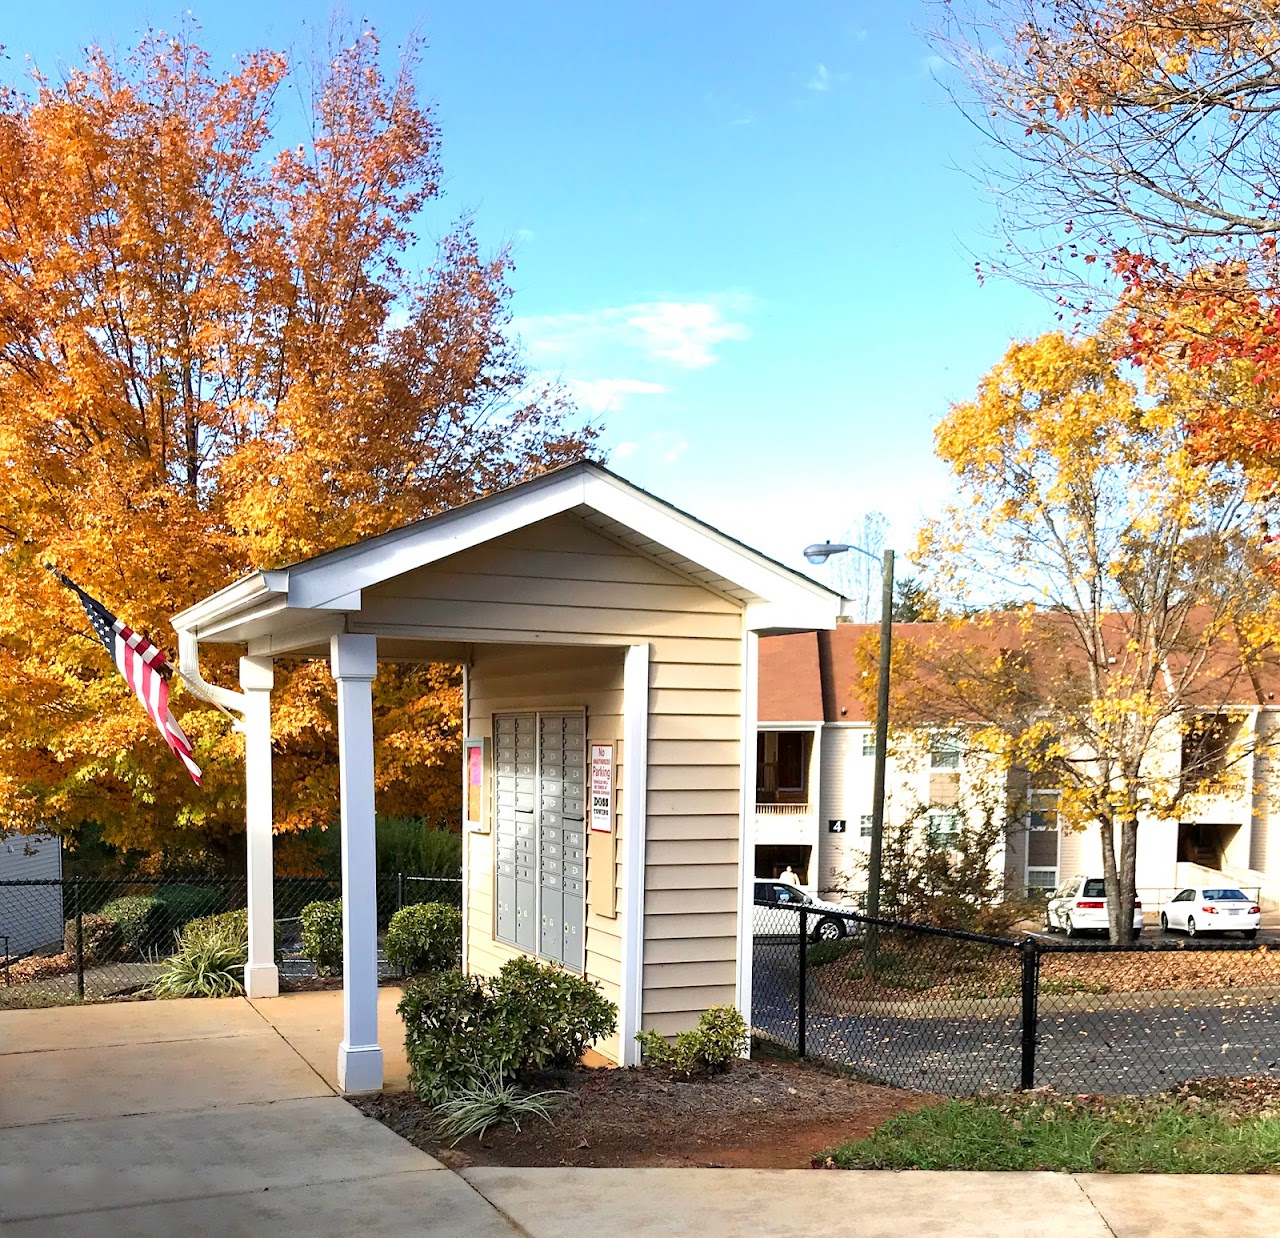 Photo of PILOT VIEW APTS II. Affordable housing located at 604 NEWSOME RD KING, NC 27021